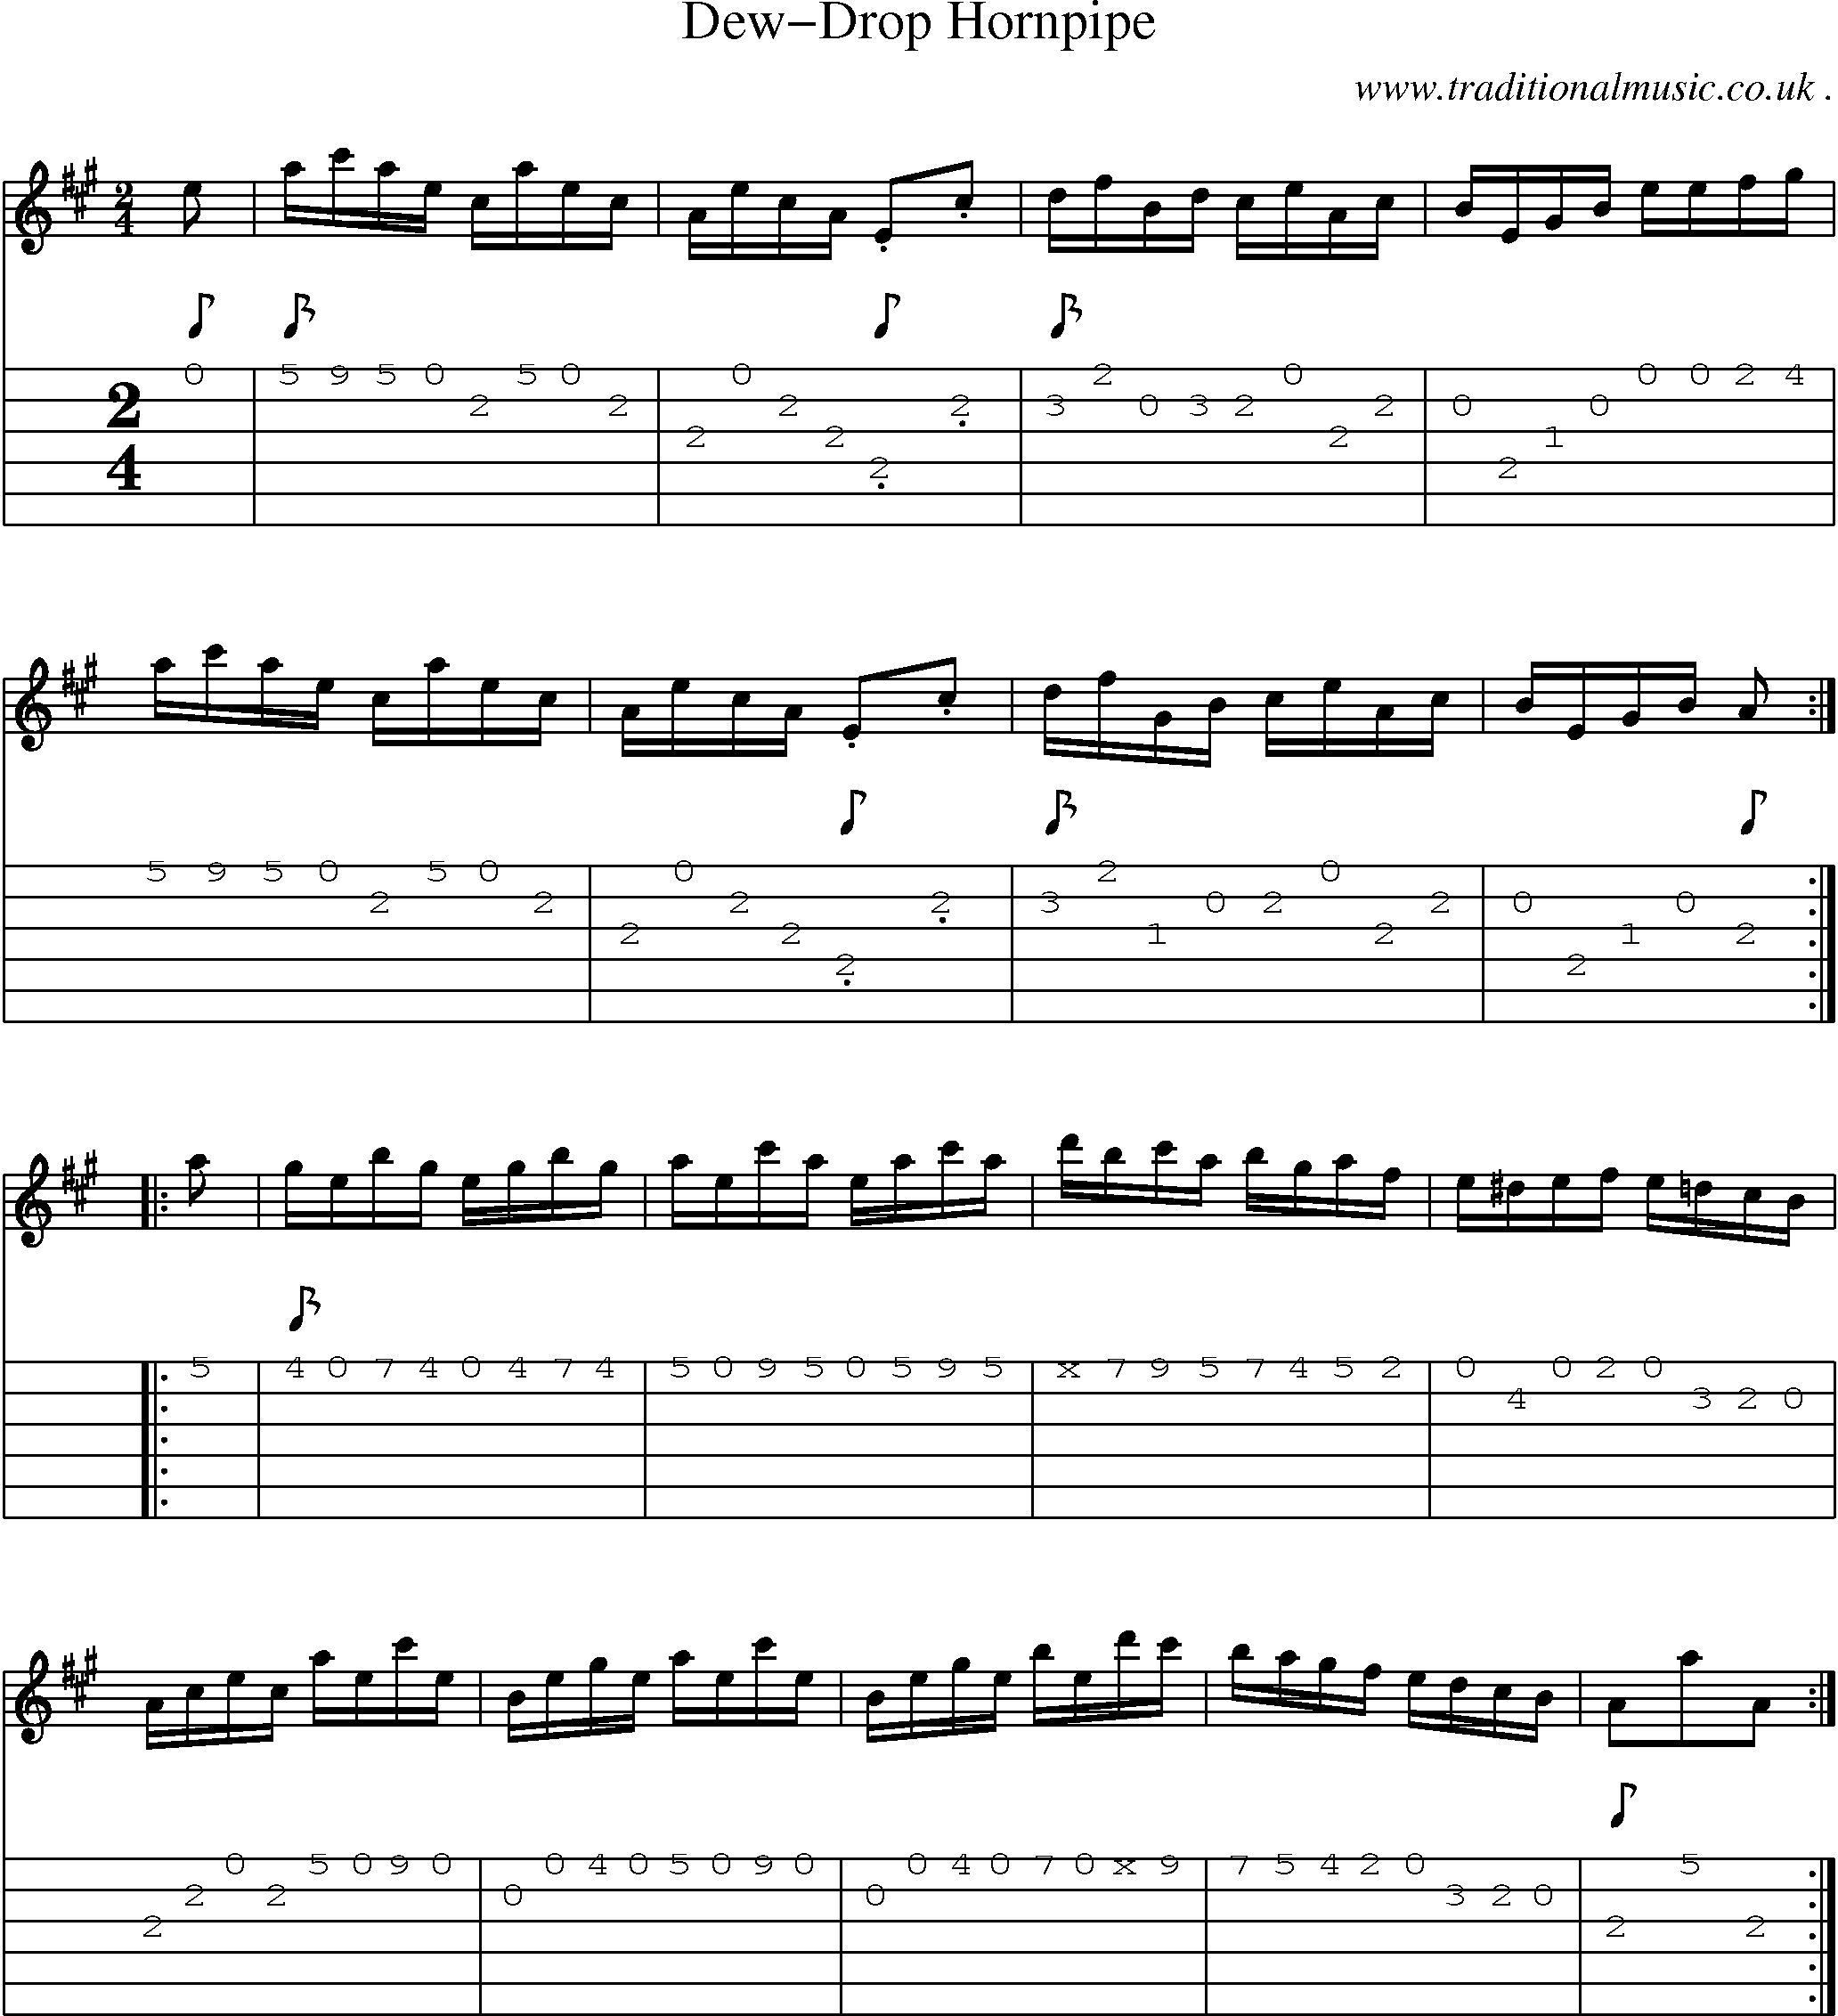 Sheet-Music and Guitar Tabs for Dew-drop Hornpipe